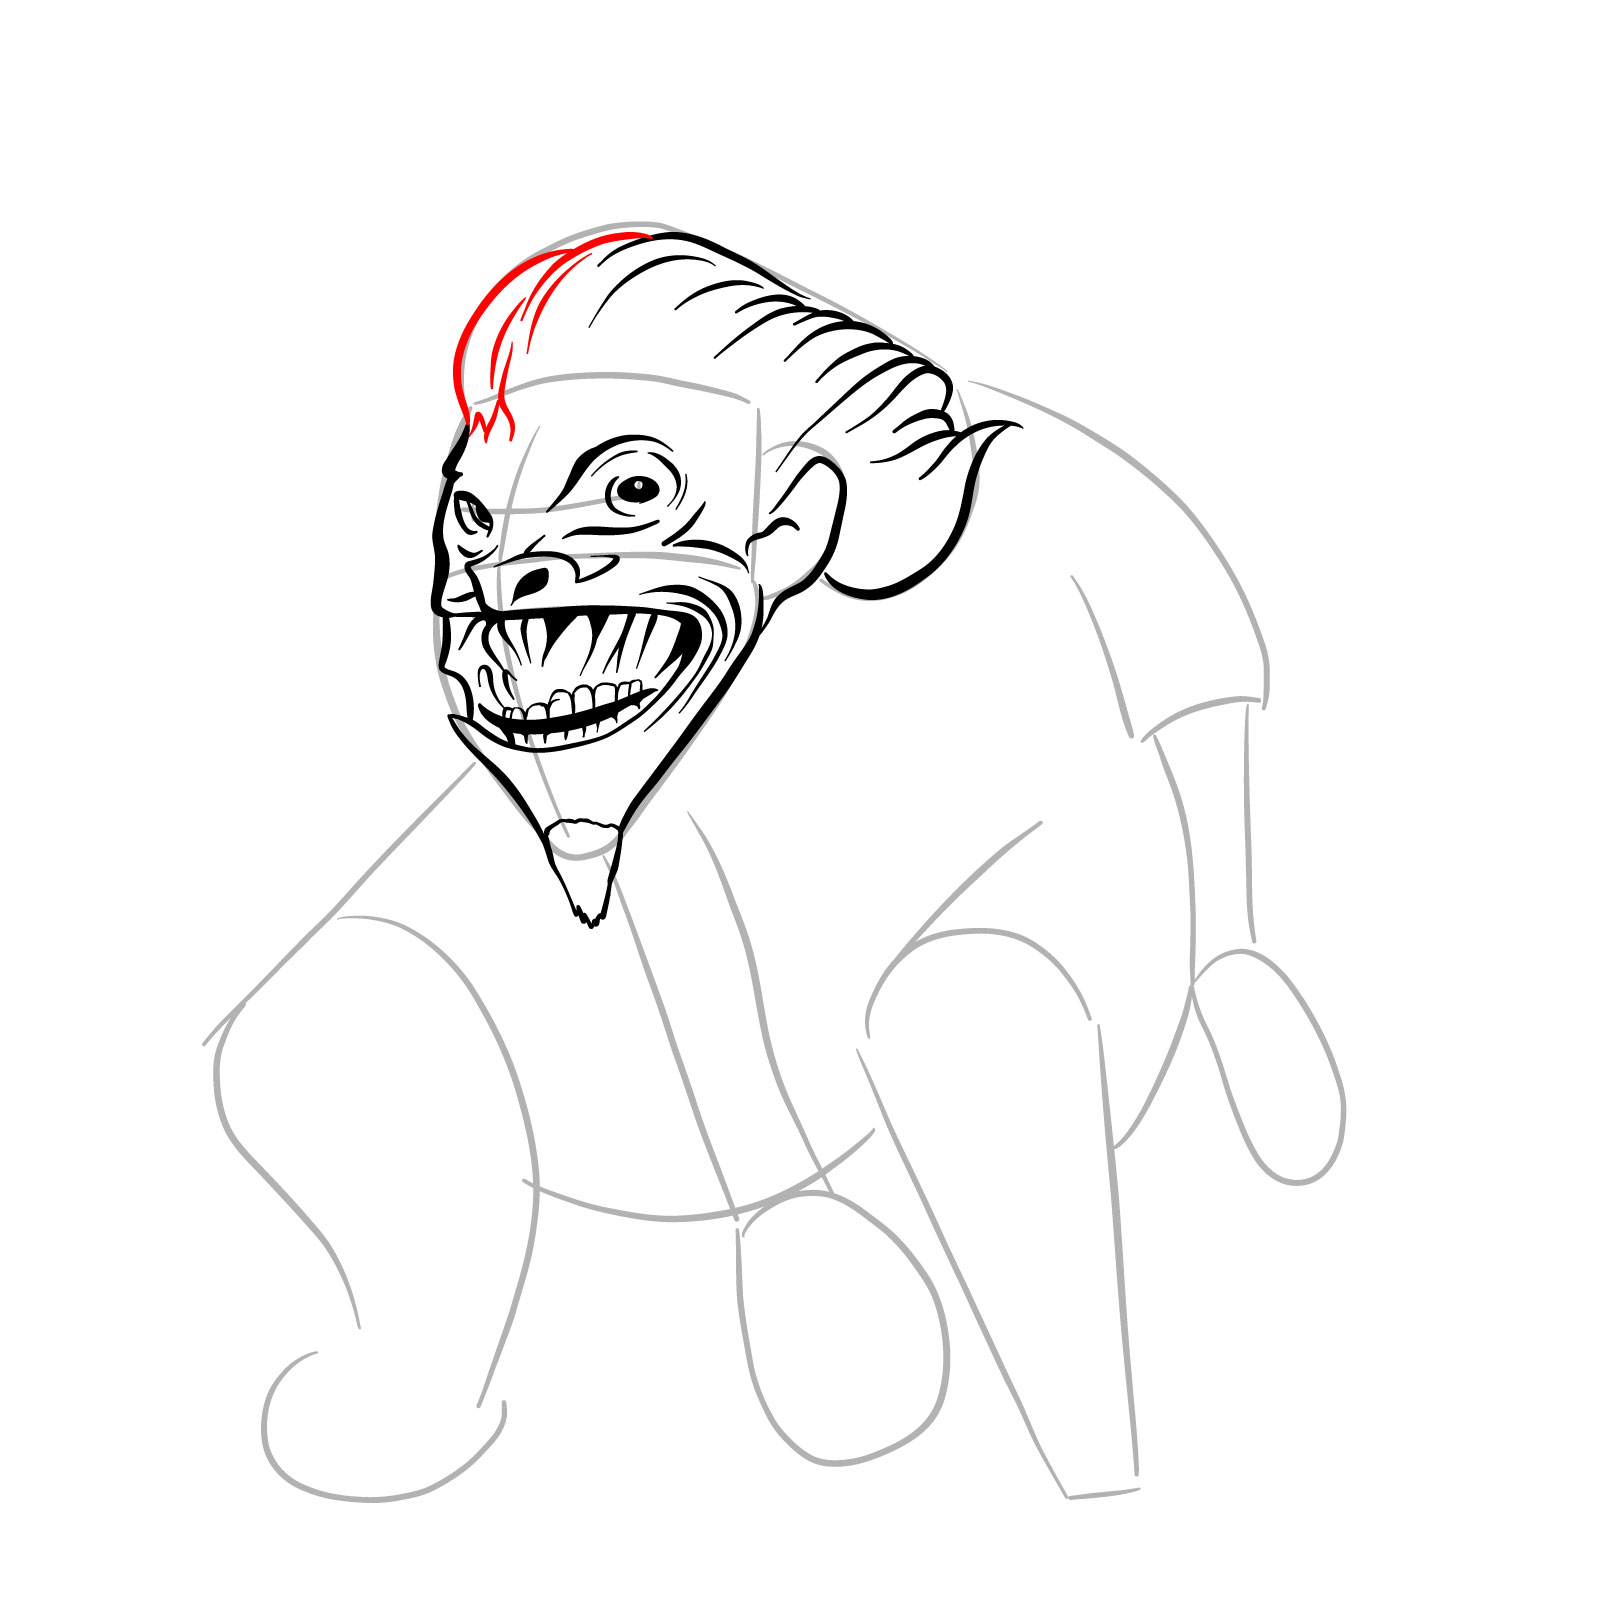 How to draw a Boggart - step 15